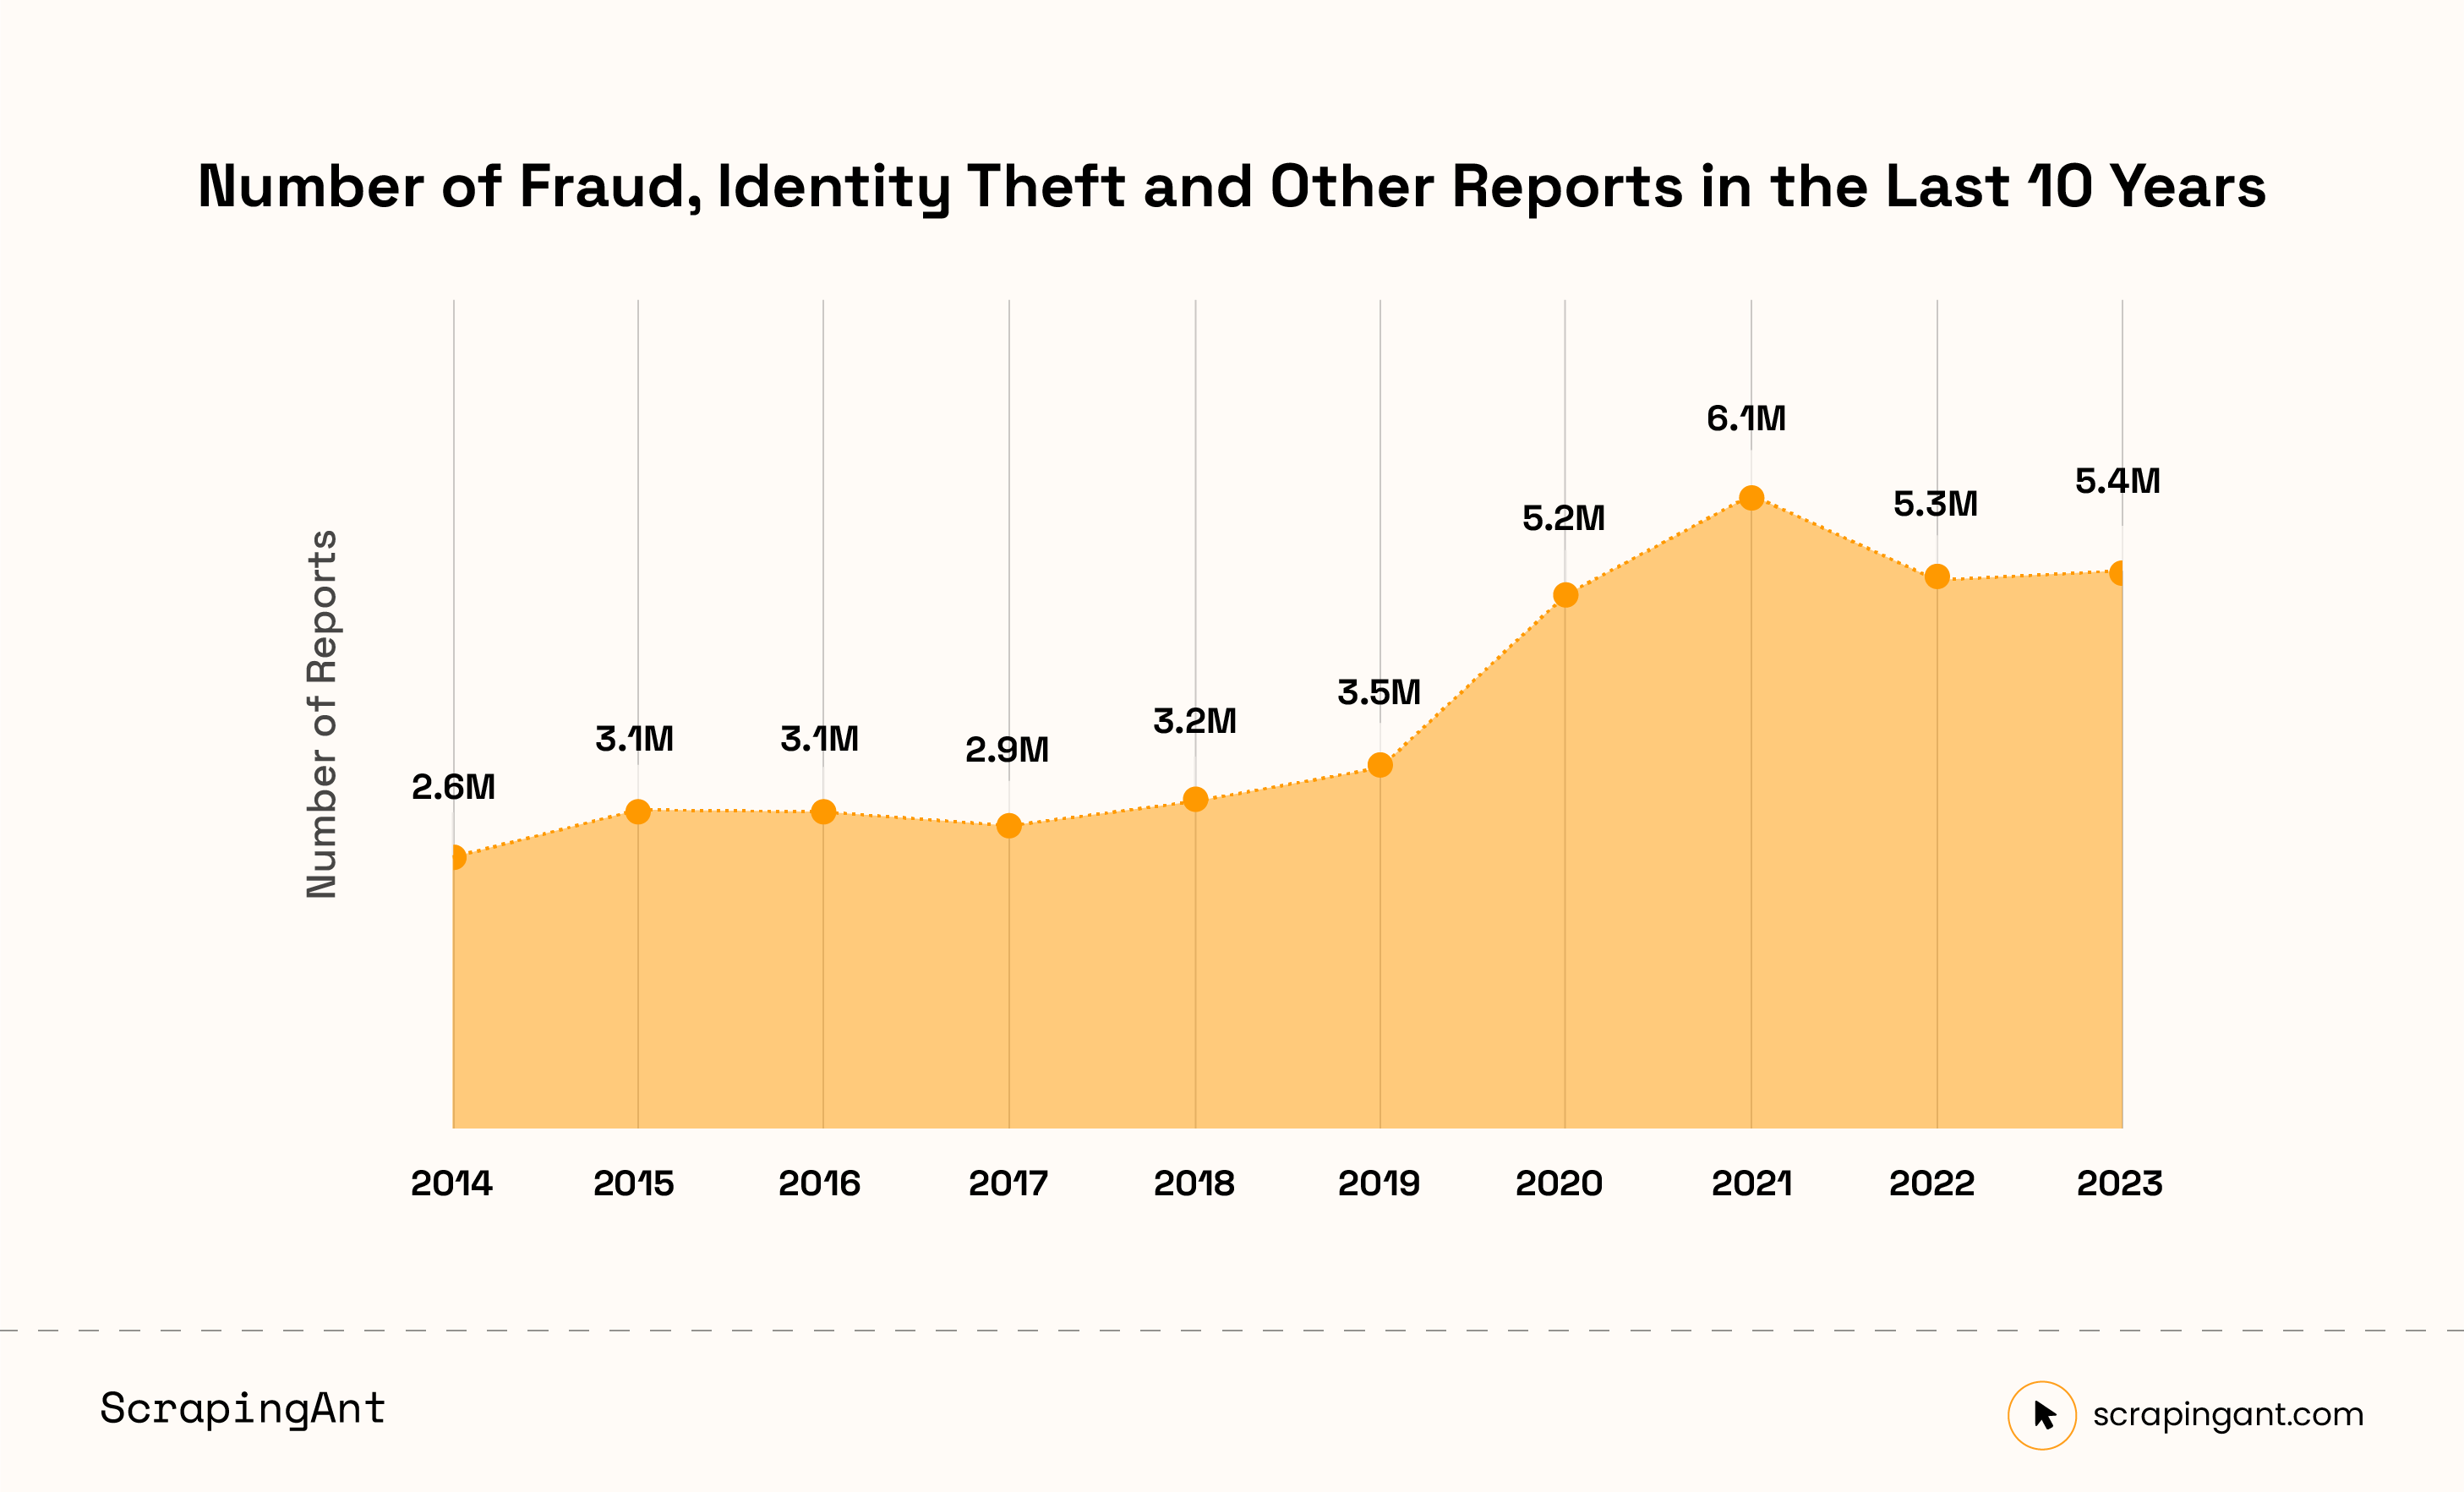 Number of Fraud, Identity Theft and Other Reports in the Last 10 Years